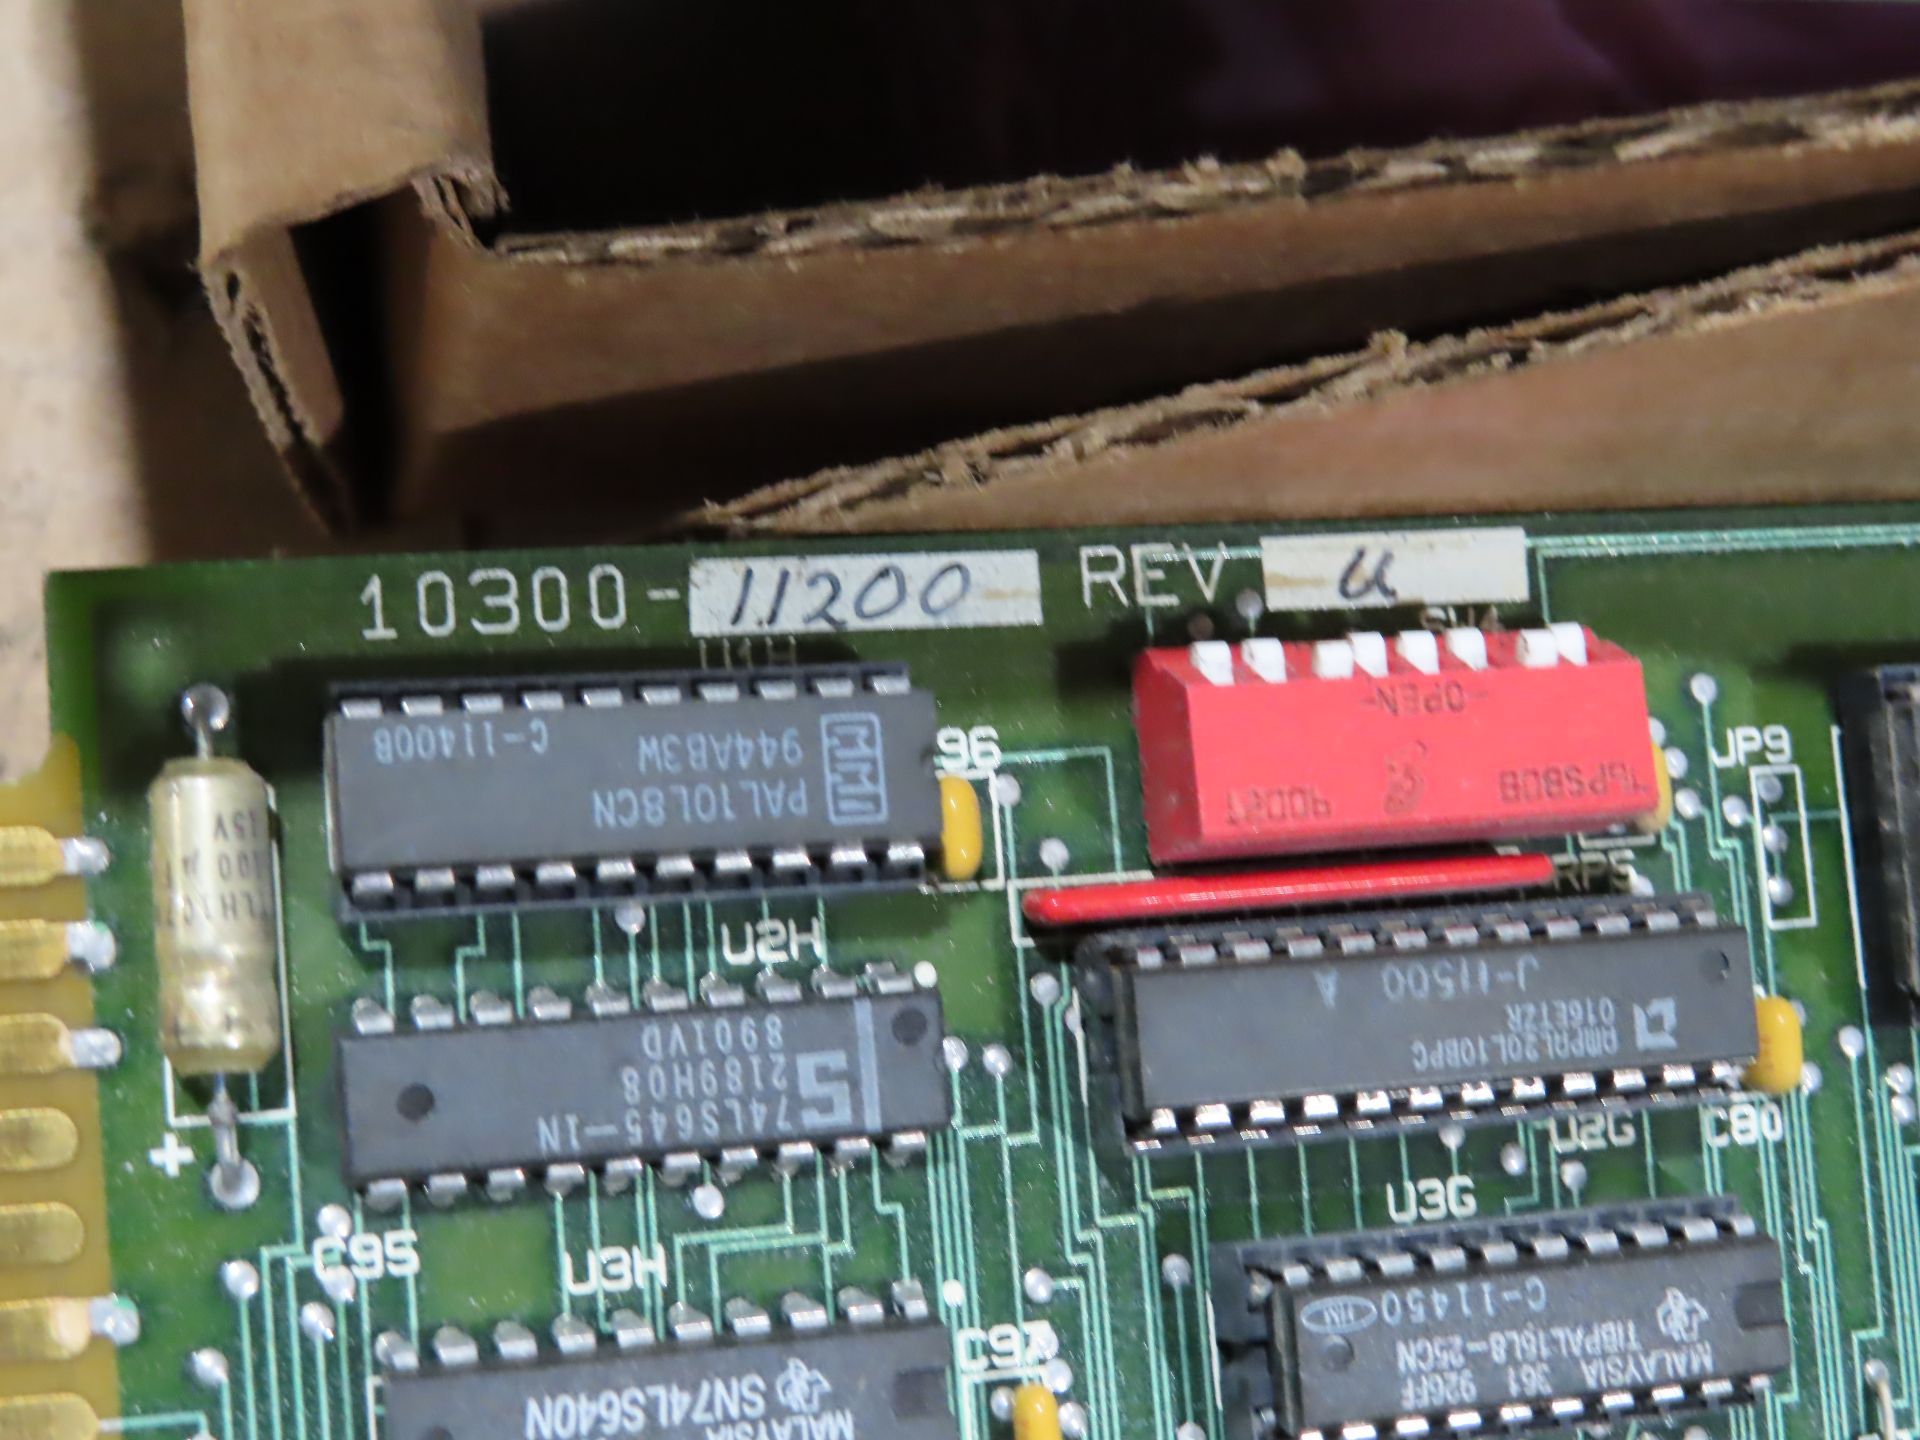 Adept 10300-11200 Rev U vision board, as always, with Brolyn LLC auctions, all lots can be picked up - Image 2 of 2